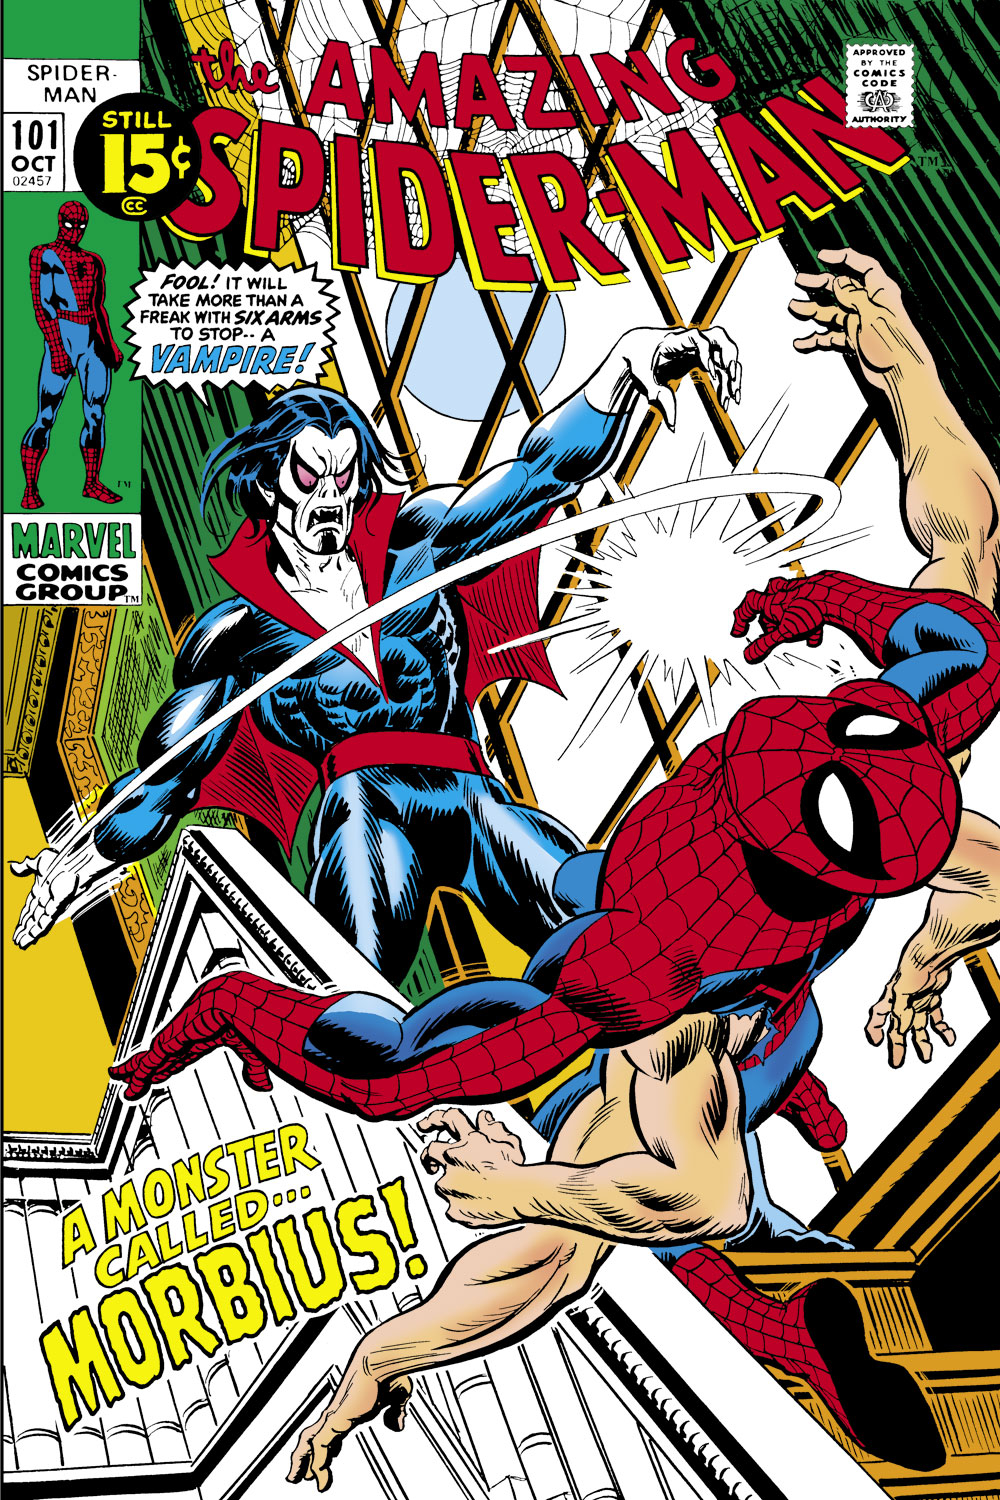 Amazing Spider Man V4 016 2016, Read Amazing Spider Man V4 016 2016 comic  online in high quality. Read Full Comic online for free - Read comics online  in high quality .